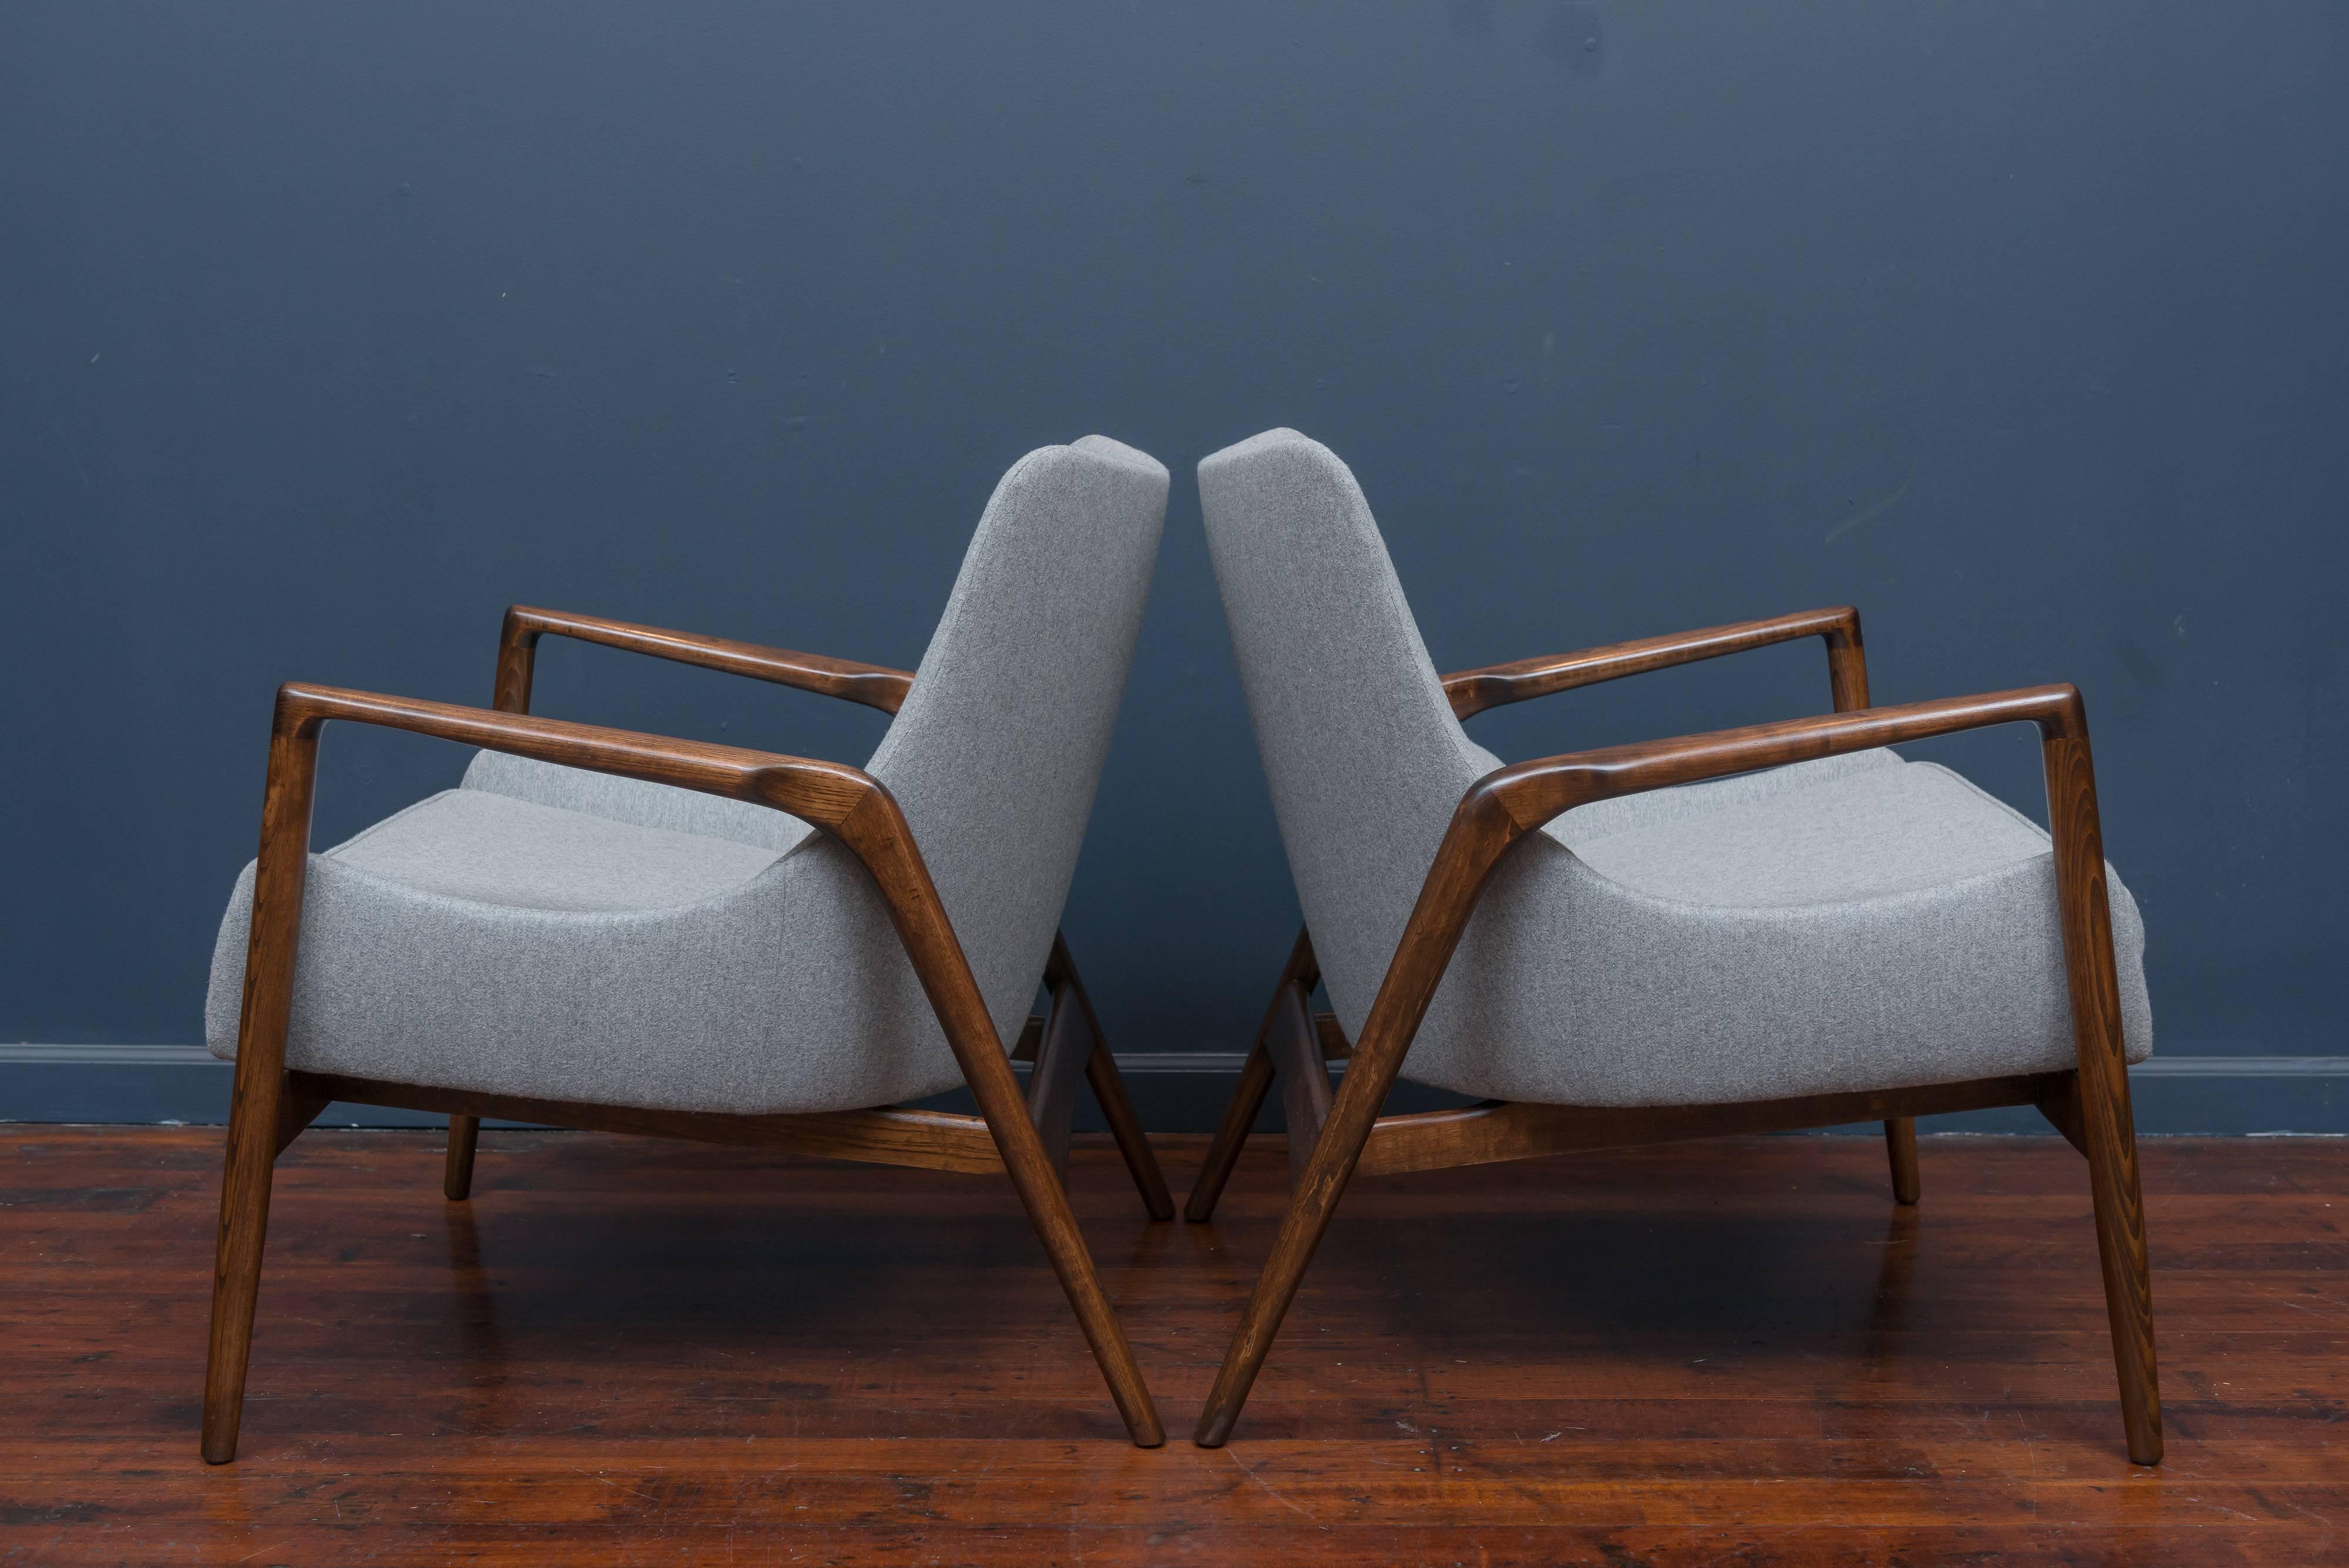 Pair of Ib Kofod-Larsen design lounge chairs, newly refinished and upholstered.